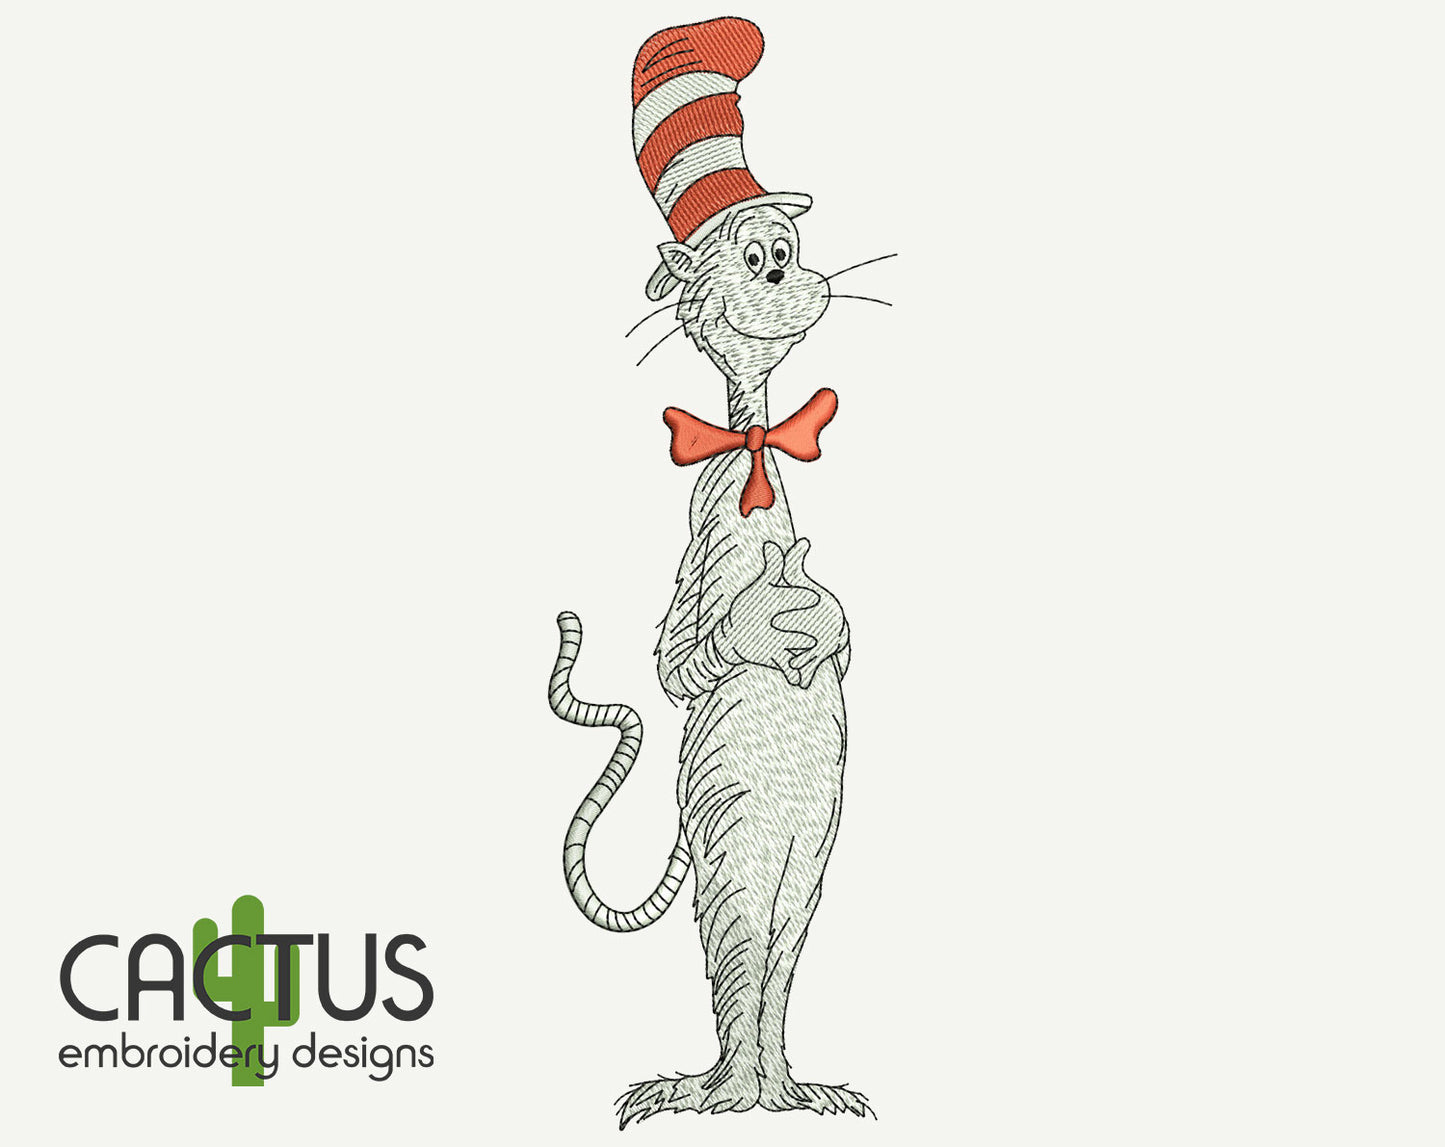 Cat in the Hat Embroidery Design